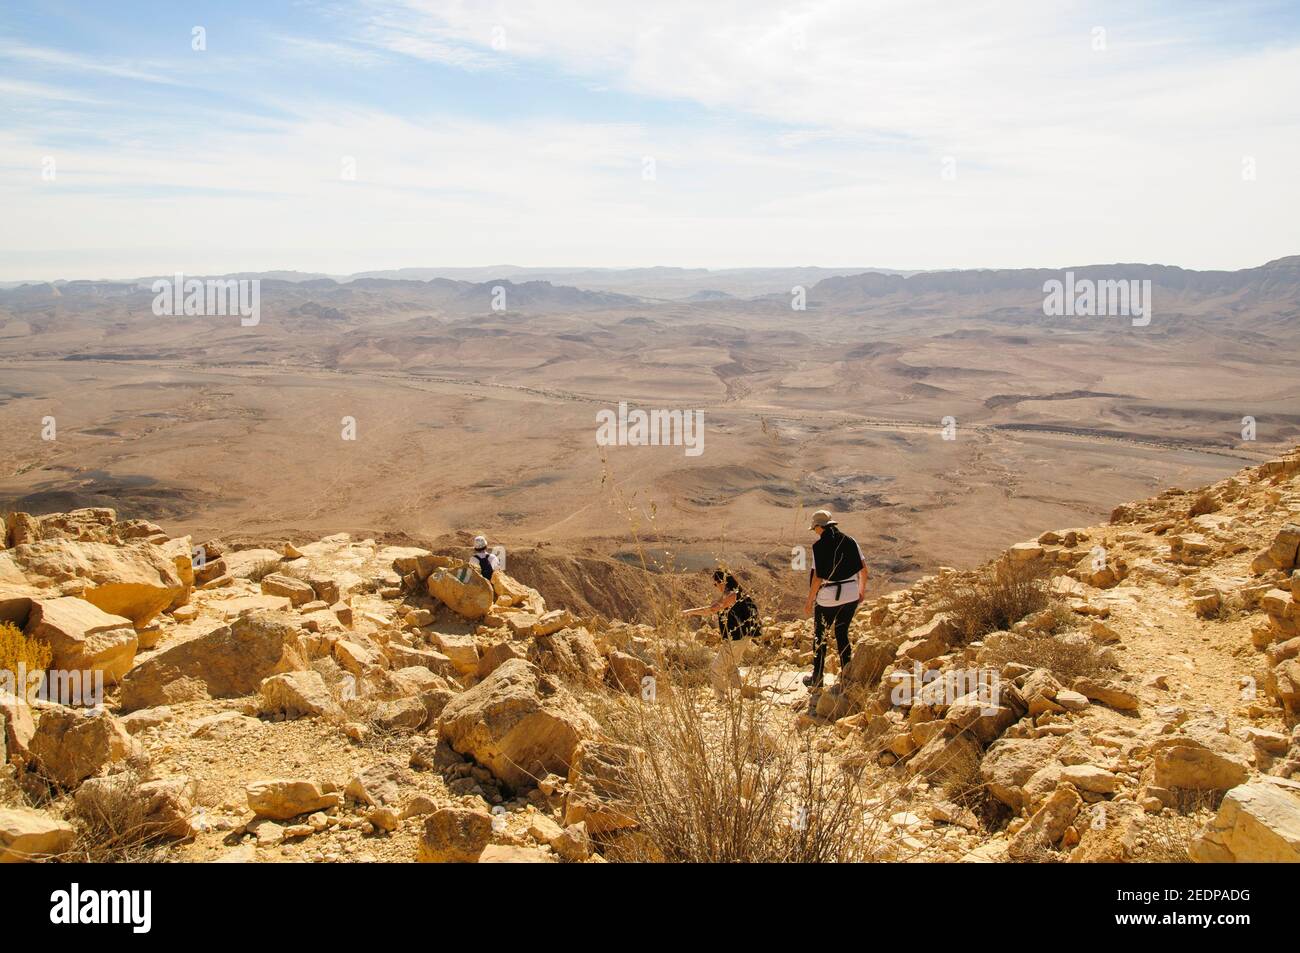 A group of hikers hiking in Makhtesh Ramon a geological feature of Israel's Negev desert. Located at the peak of Mount Negev, the world's largest 'ero Stock Photo